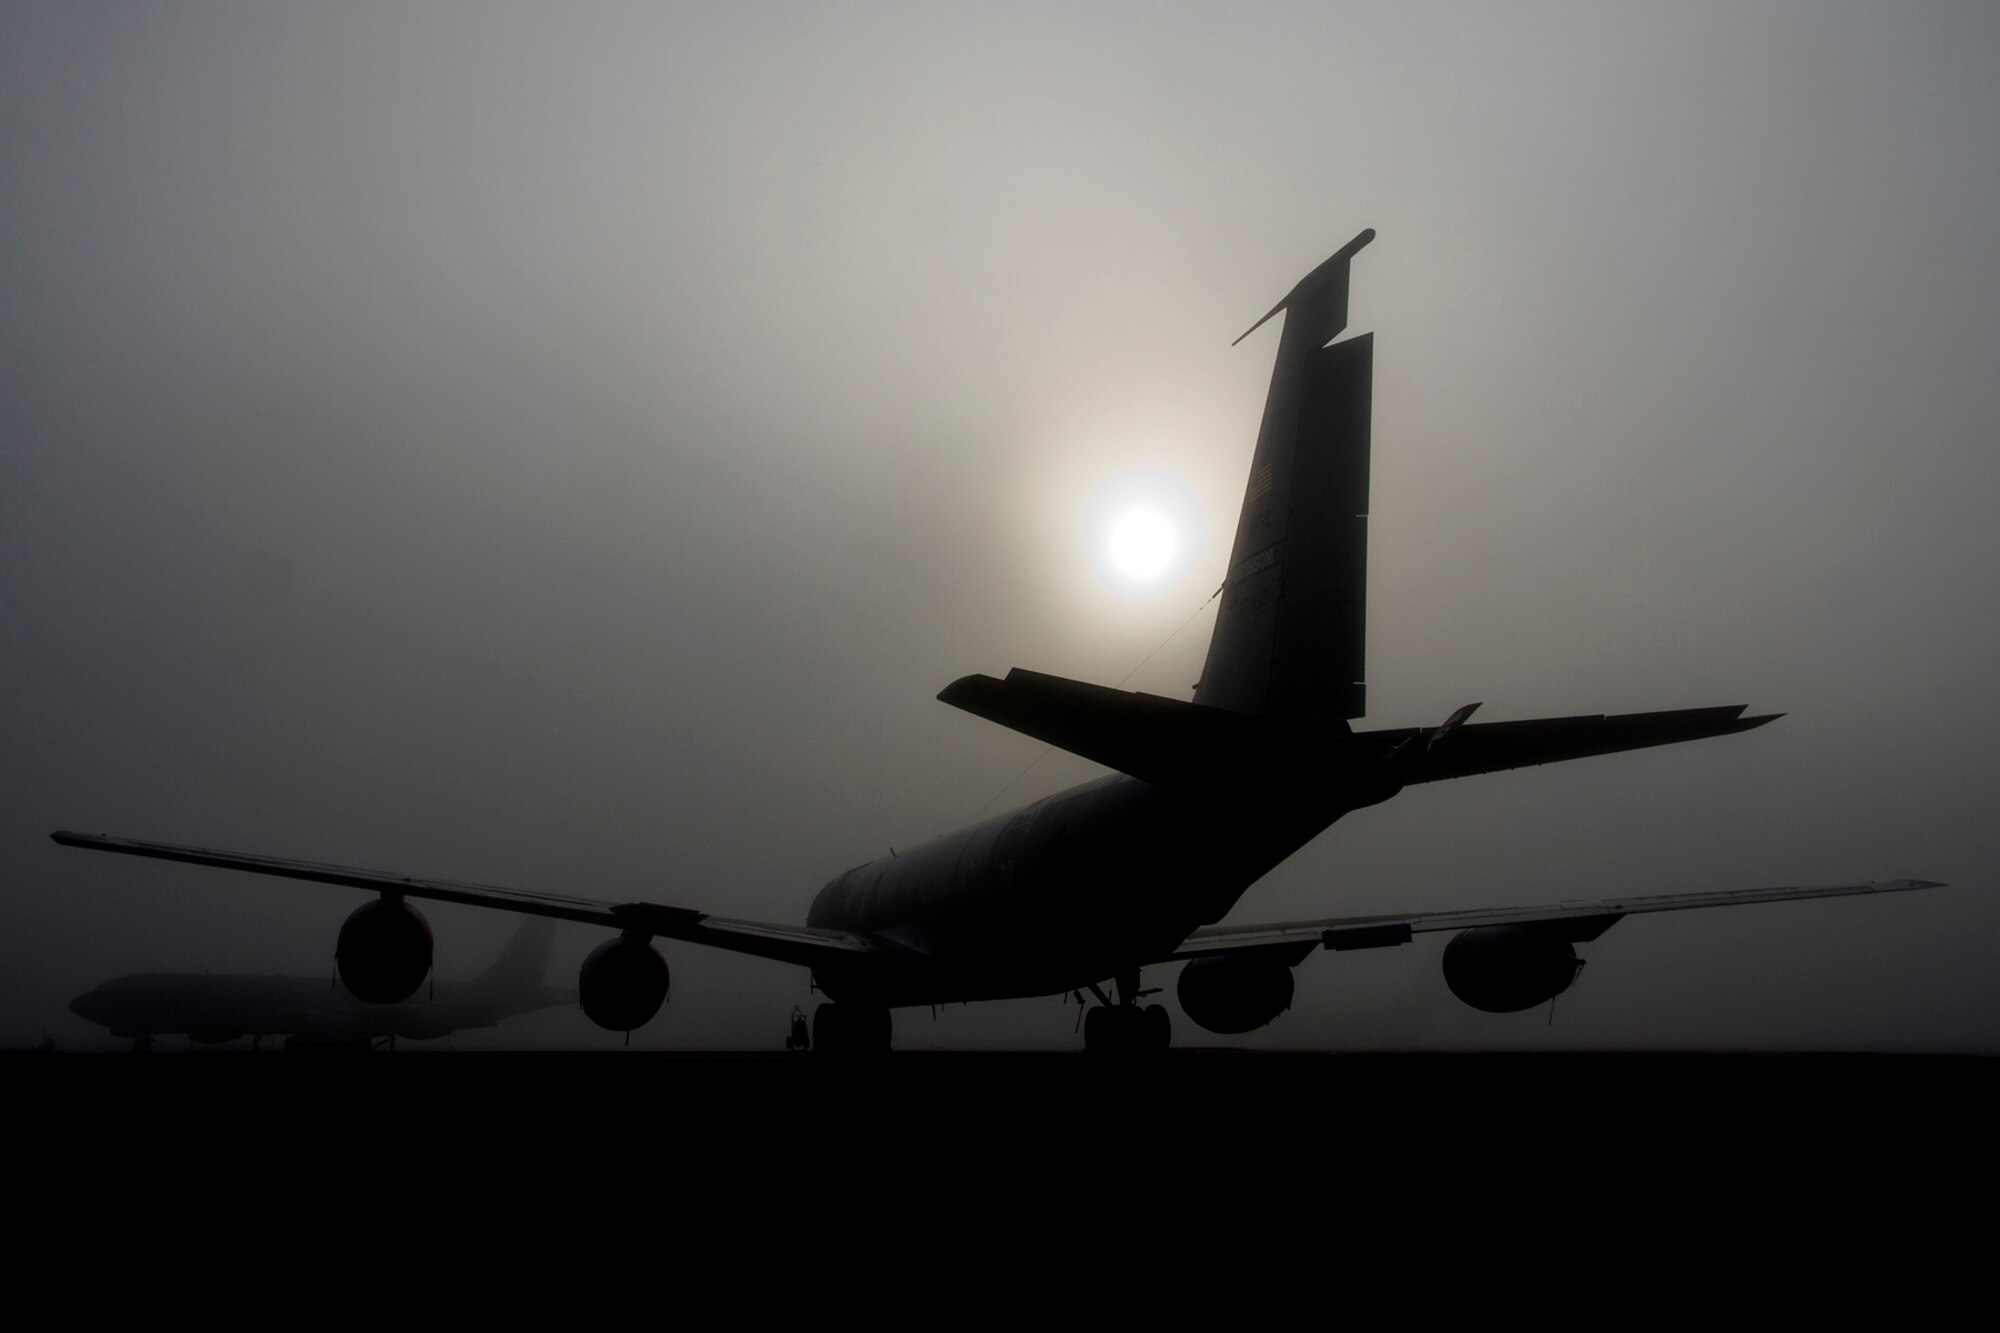 GRISSSOM AIR RESERVE BASE, Ind. -- A KC-135R Stratotanker assigned to the 434th Air Refueling Wing at Grissom is engulfed by a heavy fog that covered the airfield Sunday of the August unit training assembly. KC-135s provides the core aerial refueling capability for the U.S. Air Force and have excelled in this role for more than 50 years. There are 16 of the aircraft assigned to the 434th ARW, making it the largest KC-135 unit in the Air Force Reserve Command. (U.S. Air Force photo/Tech. Sgt. Mark R. W. Orders-Woempner)
